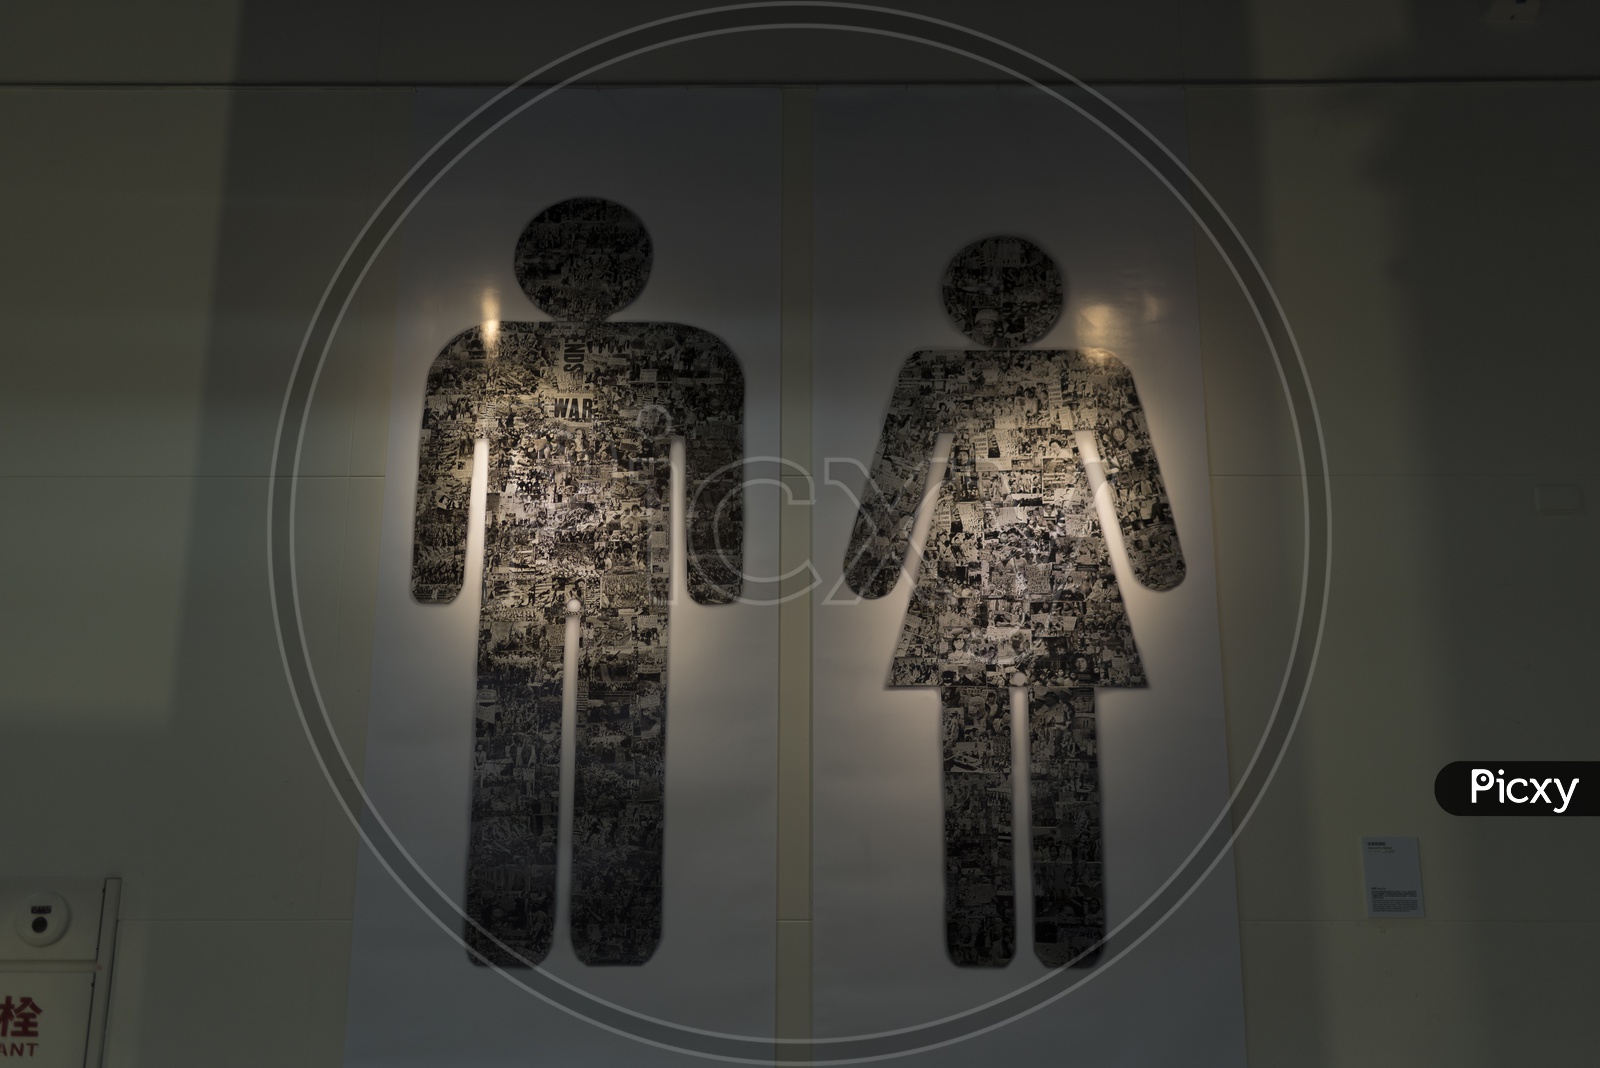 Male and Female signage on the bathroom